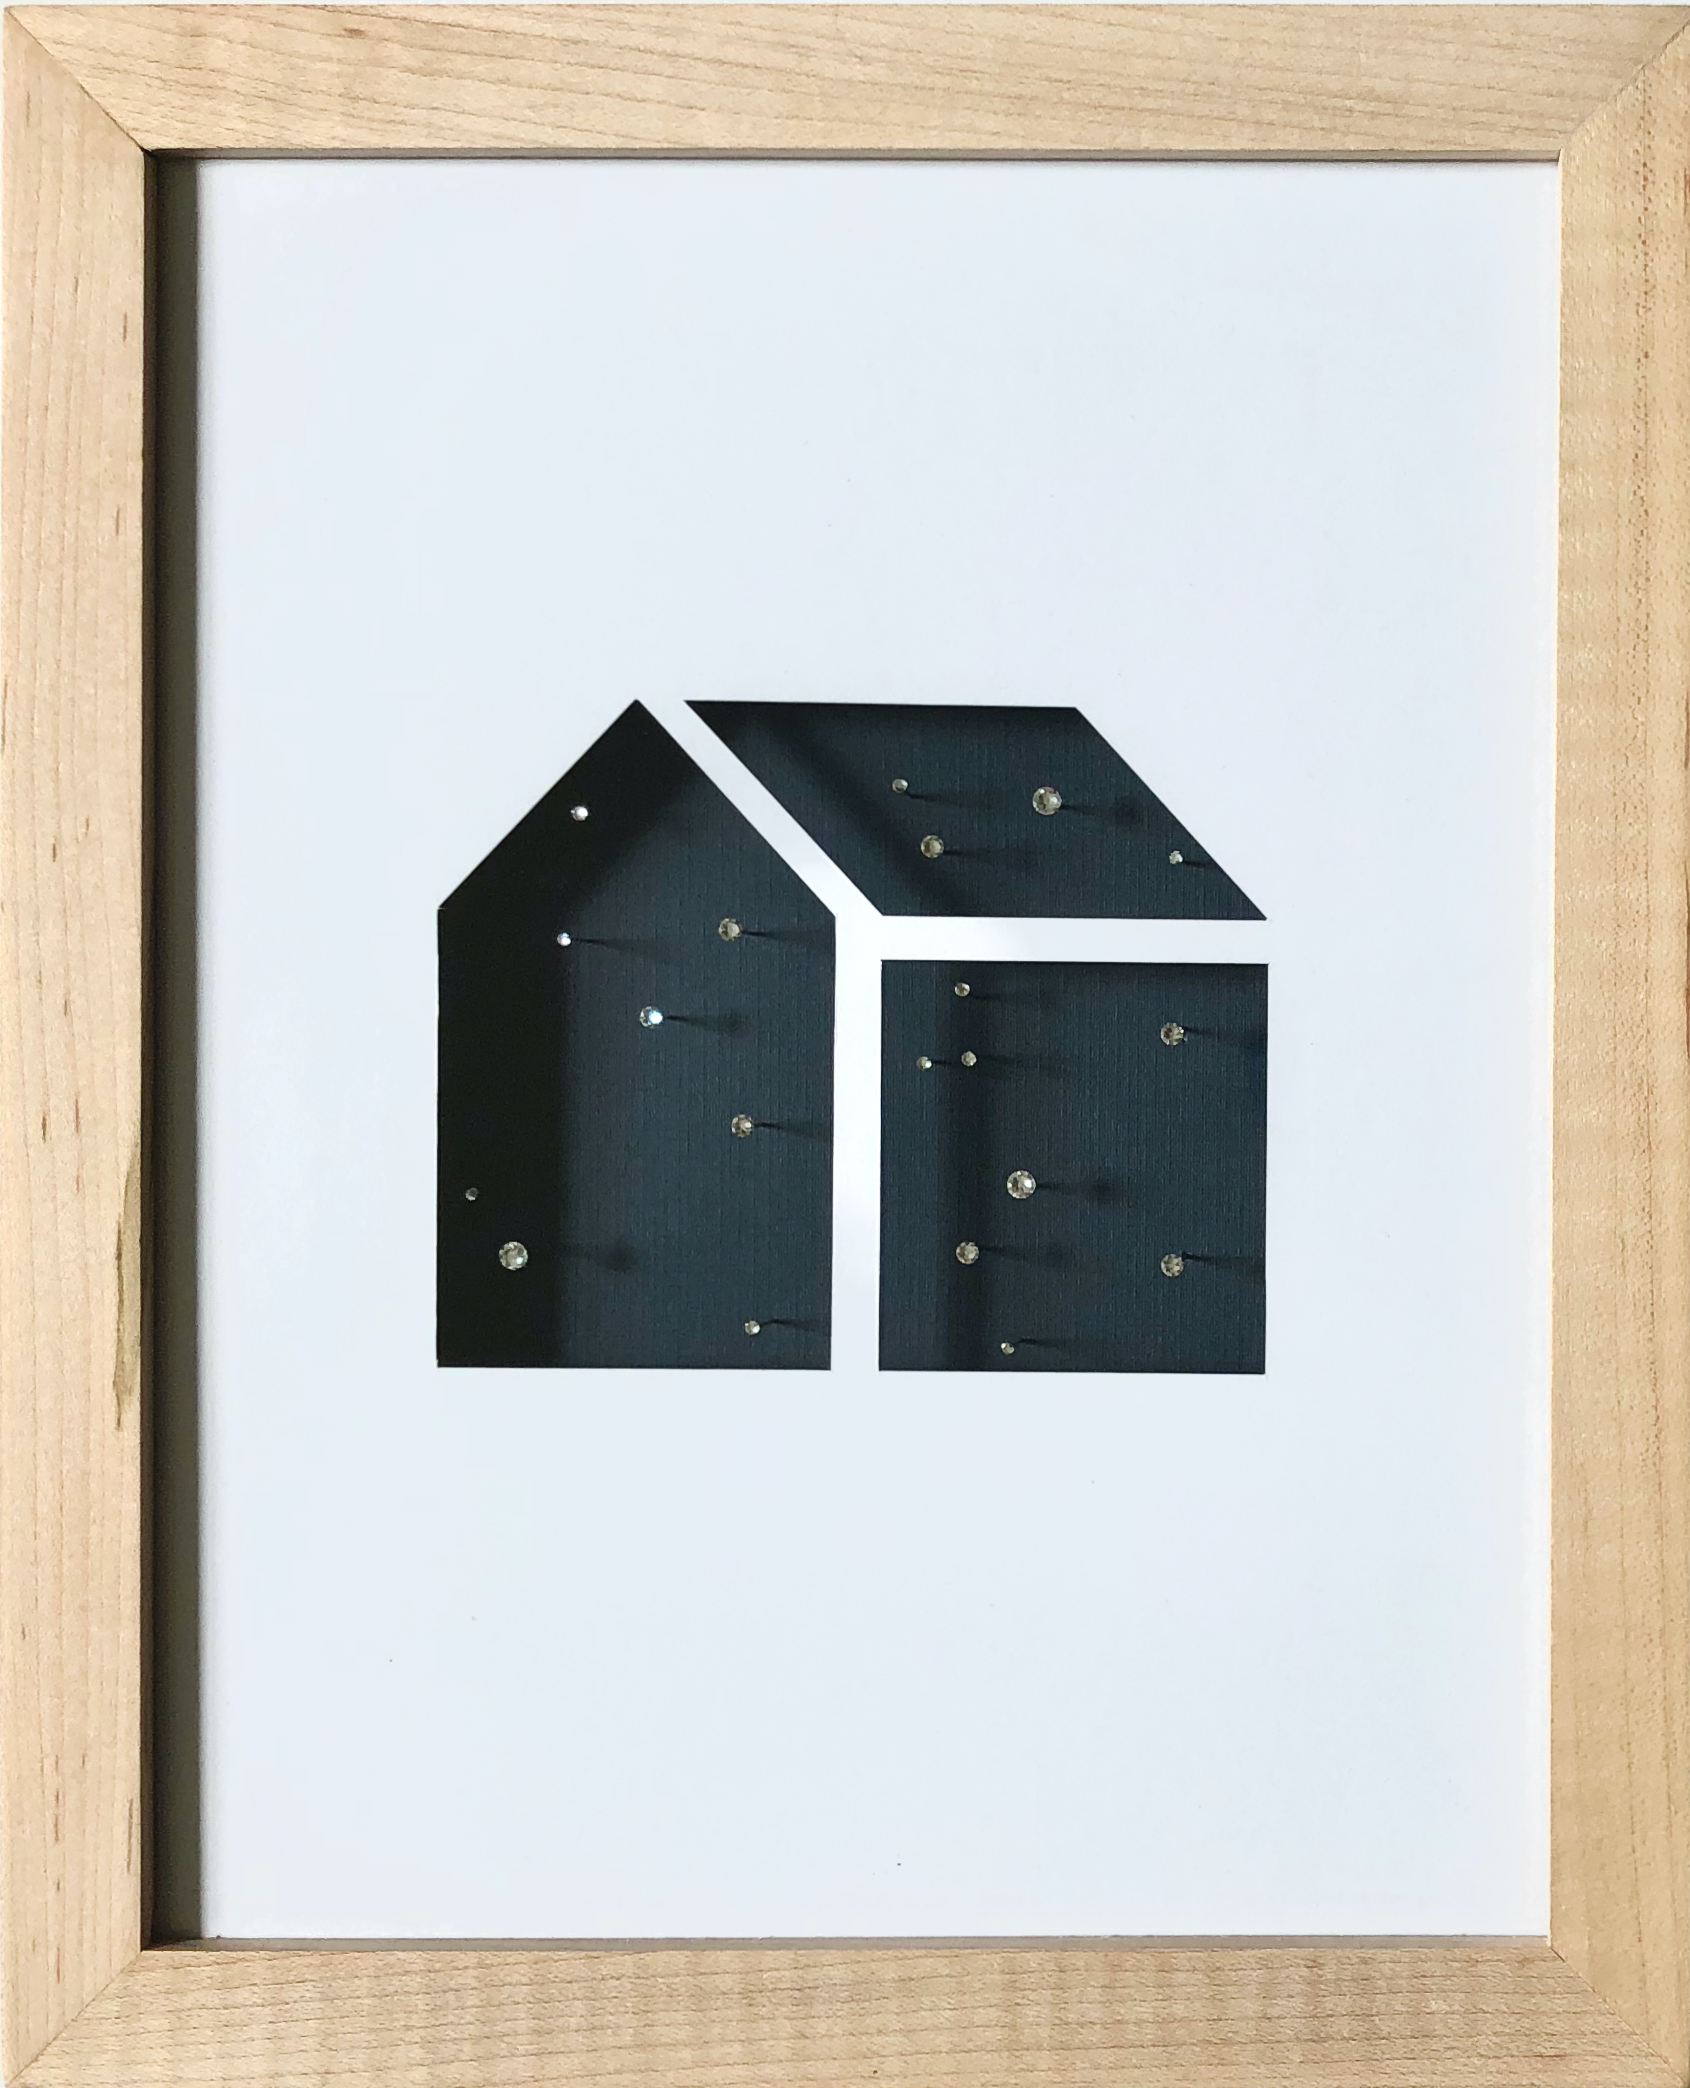   sky house  paper, pins, crystals 10 x 8 inches 